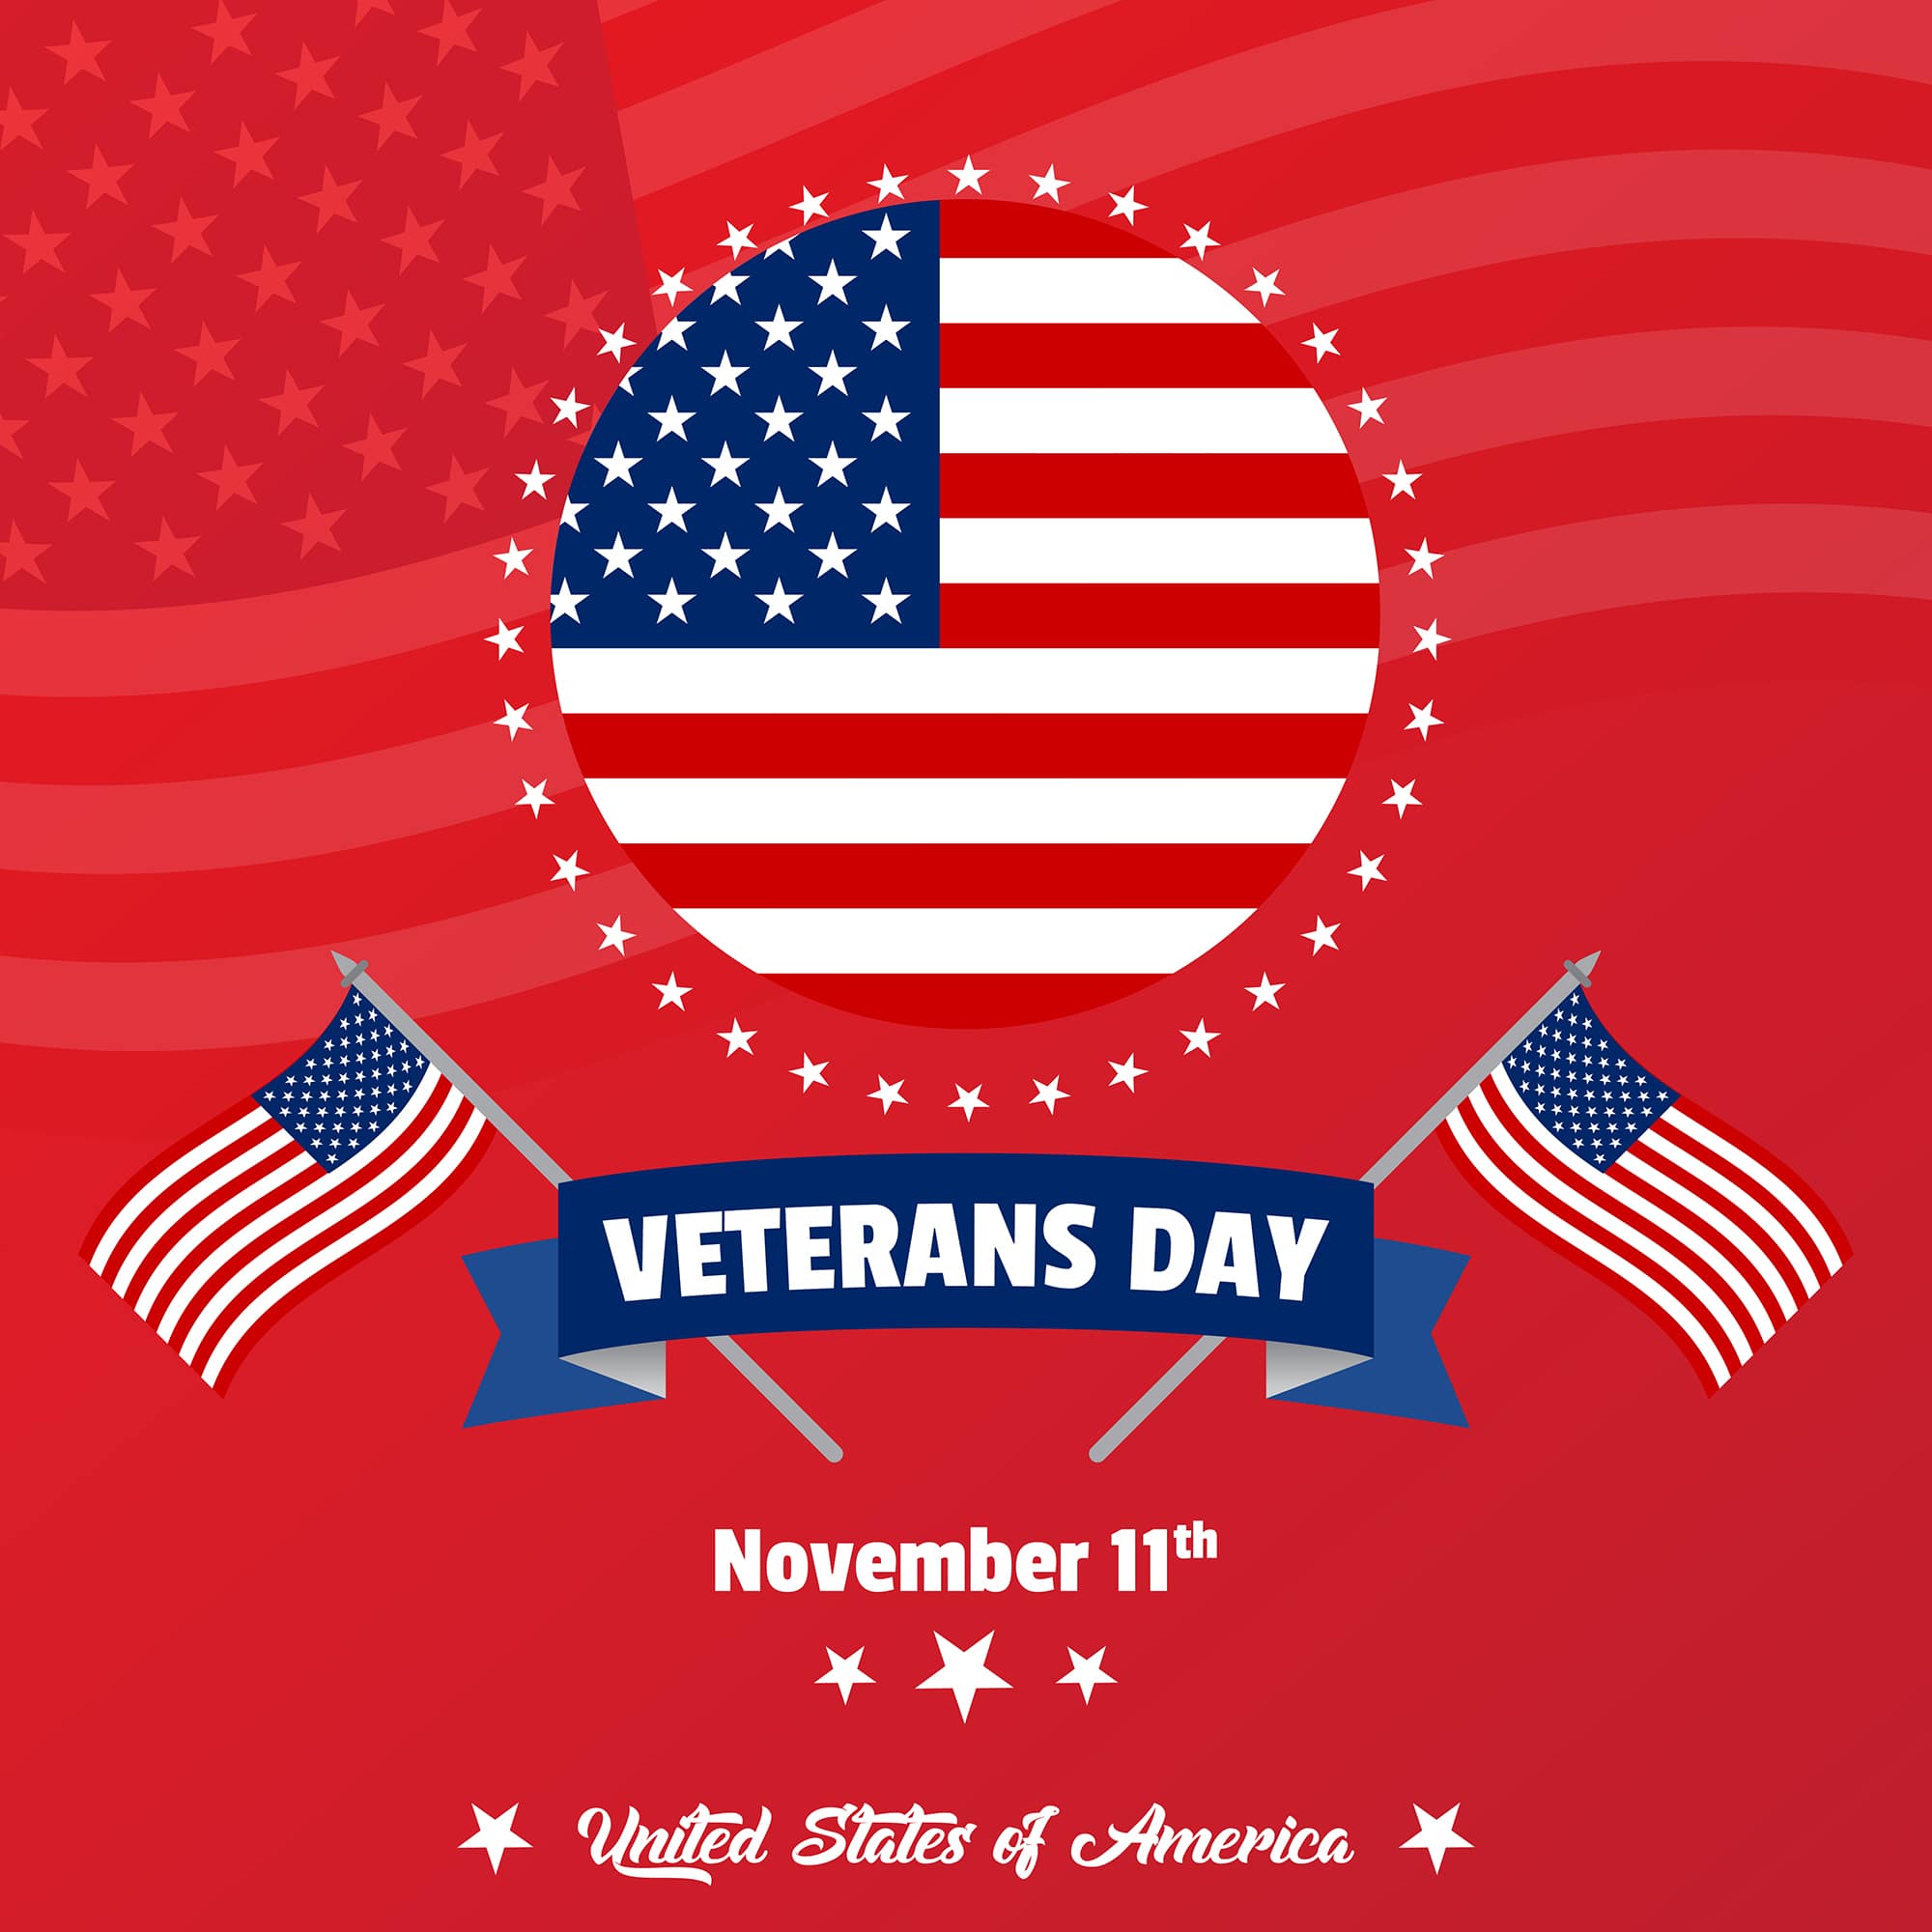 Happy Veterans Day poster and social media template for free download with flag of America in background